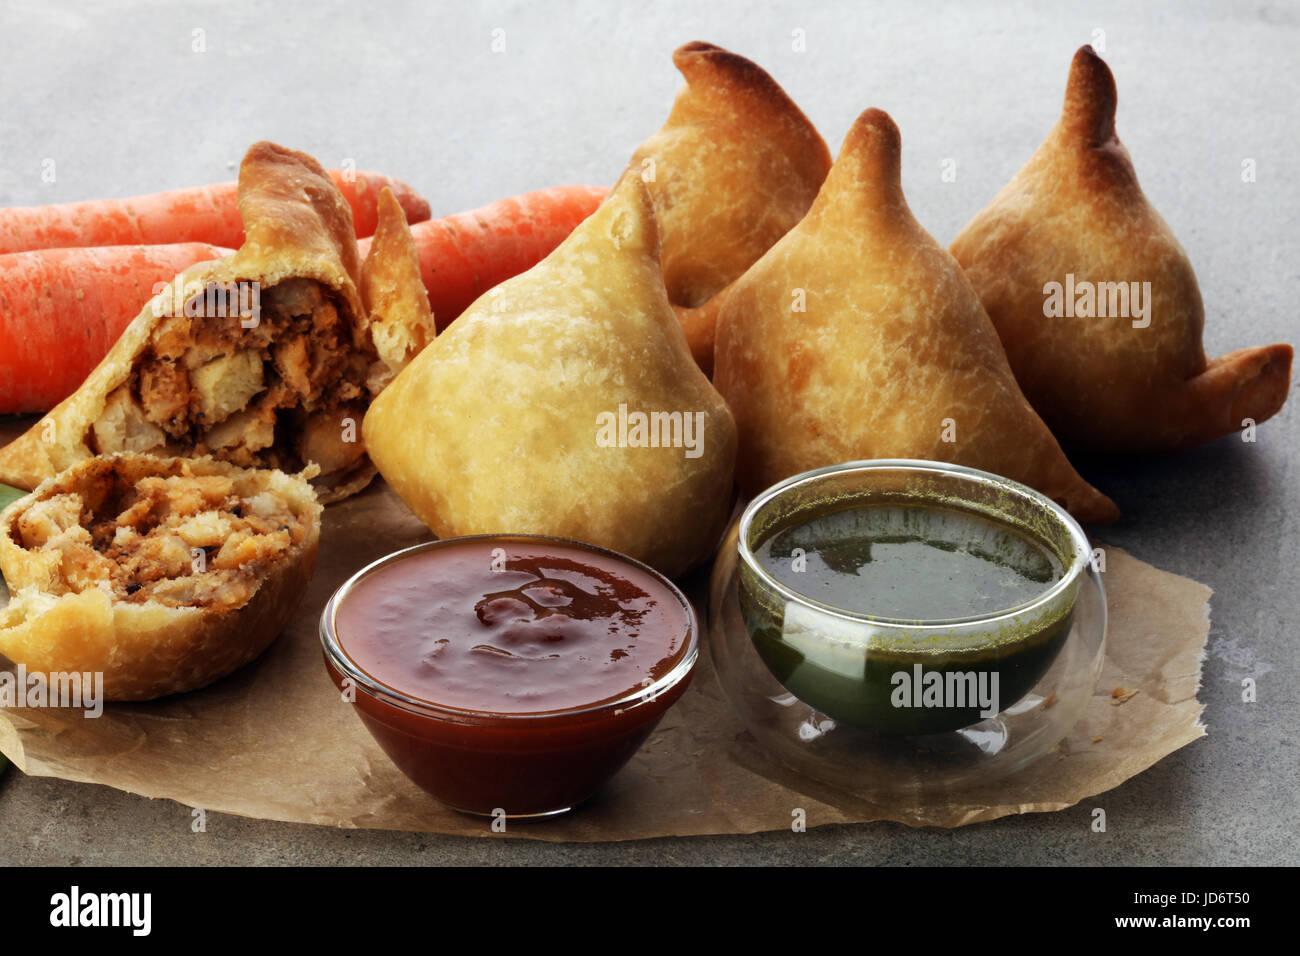 Indian special traditional street food punjabi samosa or Coxinha, Croquete and other Fried Brazilian Snacks Stock Photo